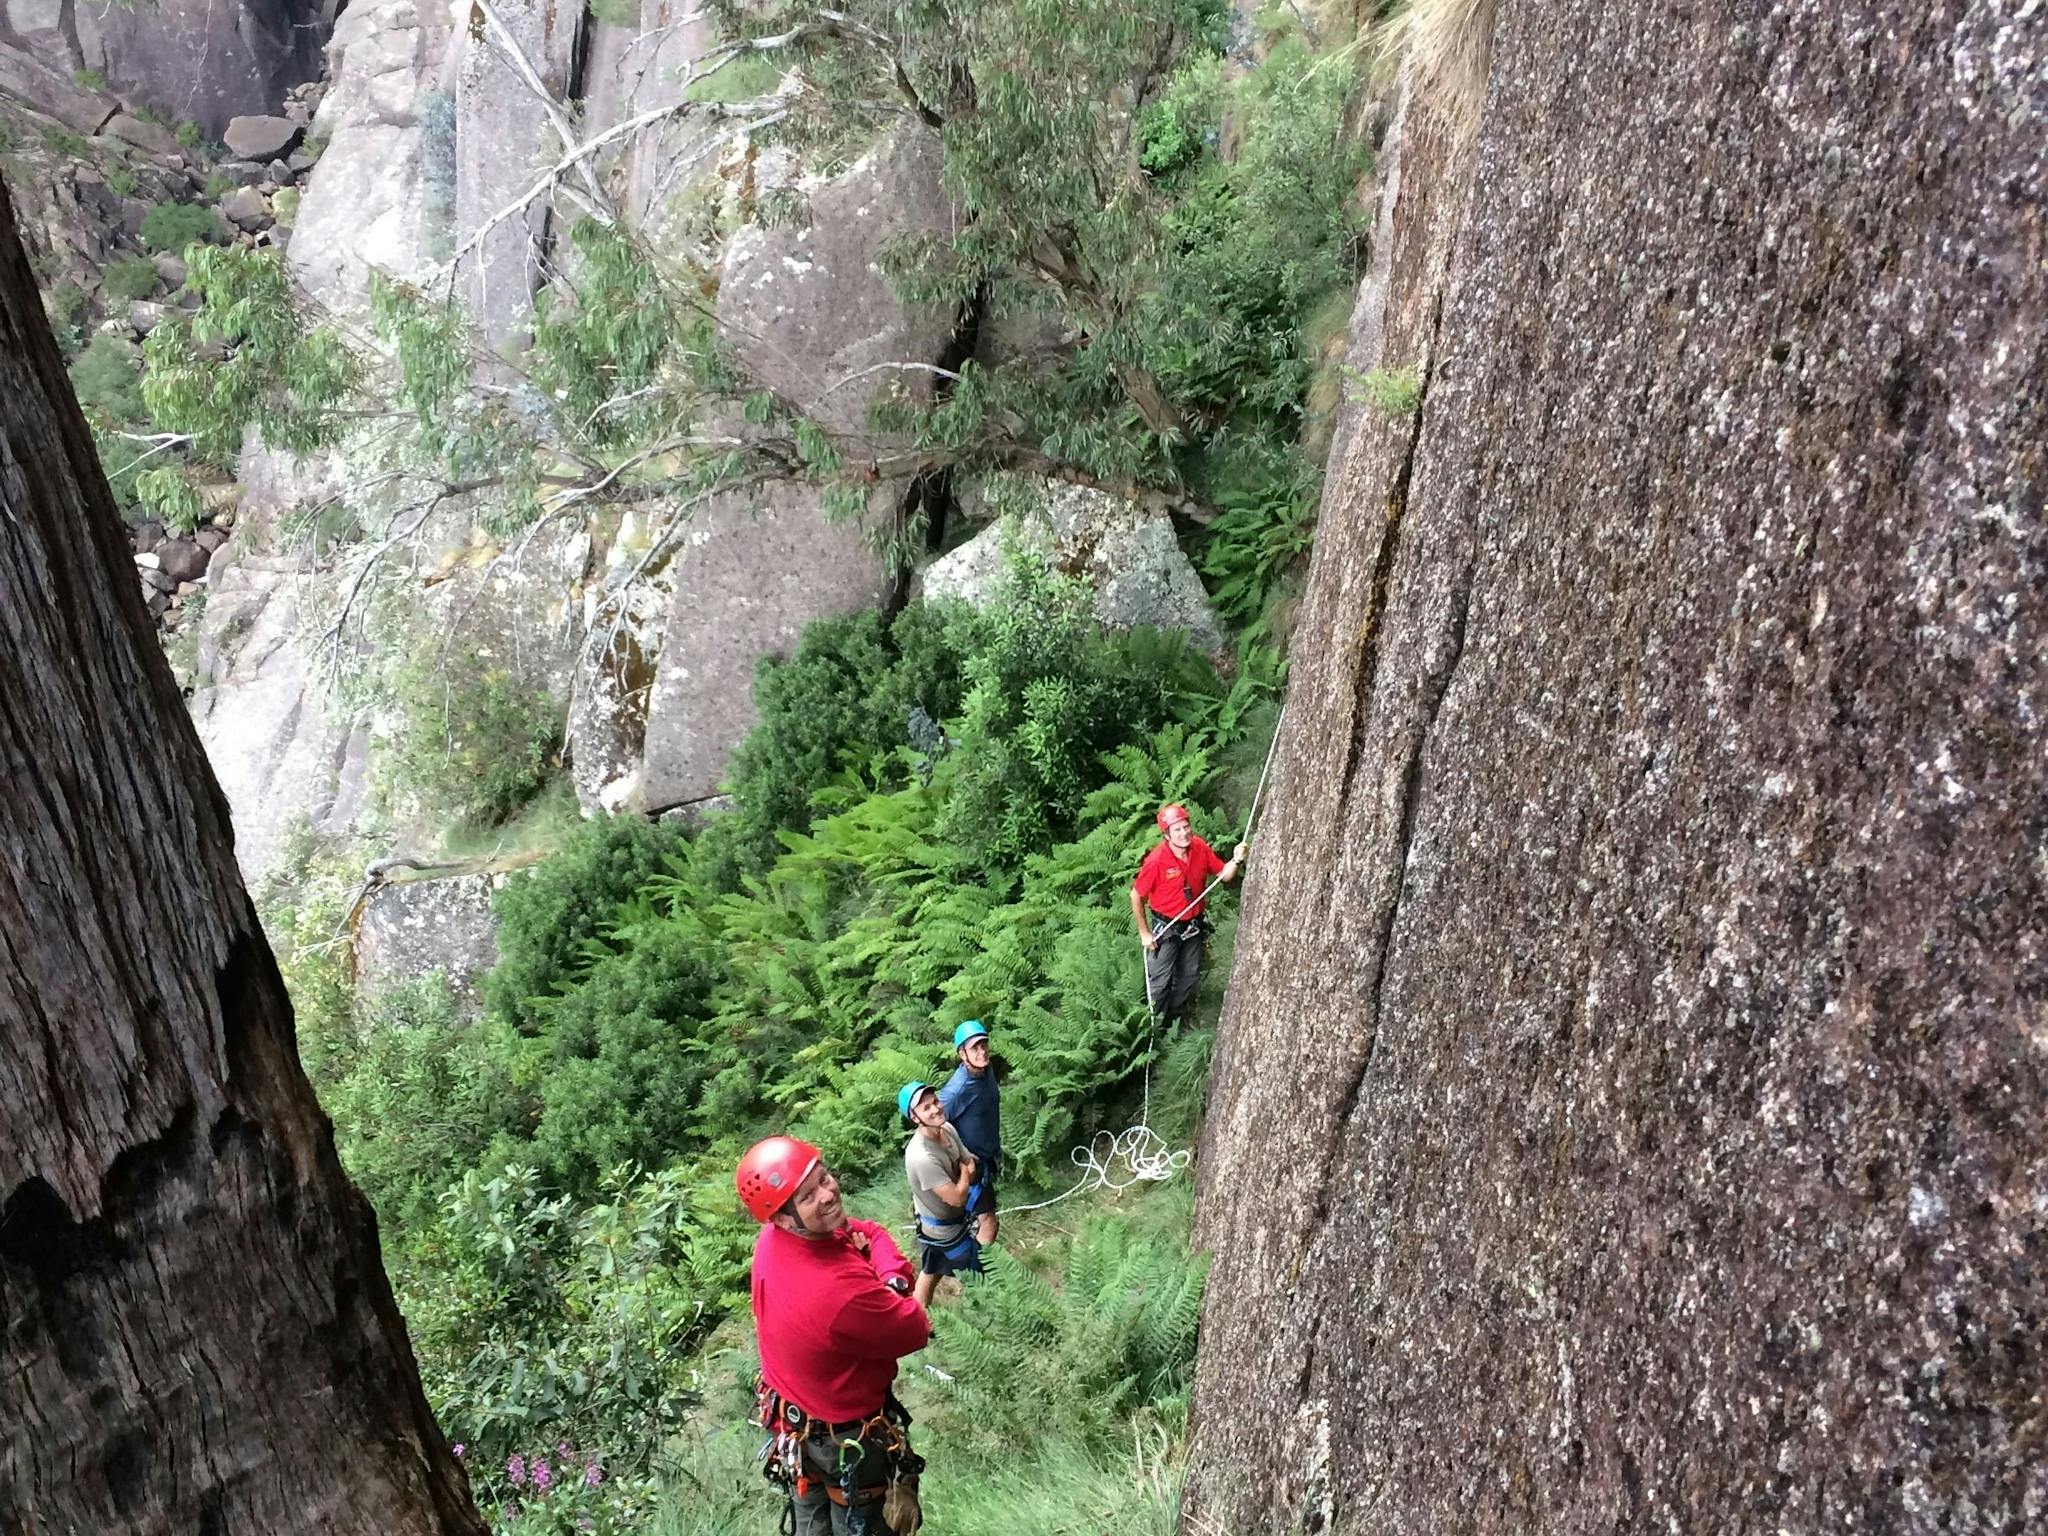 On the way down The North Wall